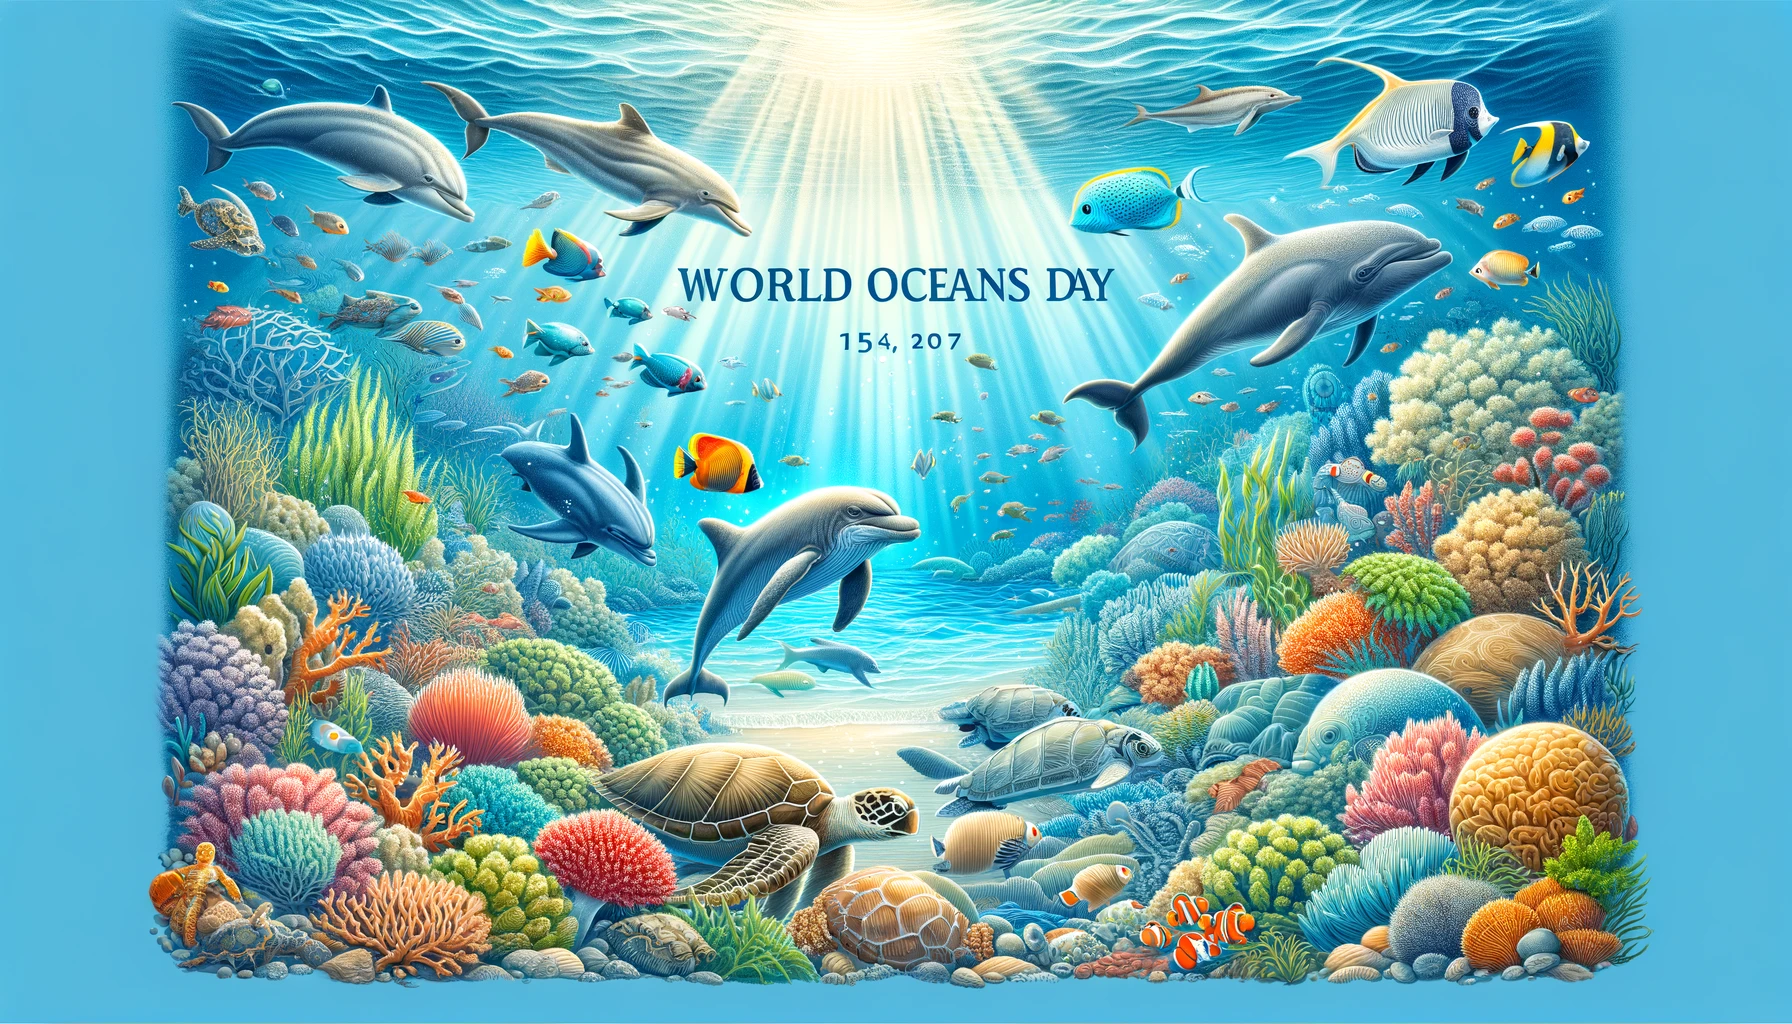 World Oceans Day Greetings to Spread Conservation Awareness